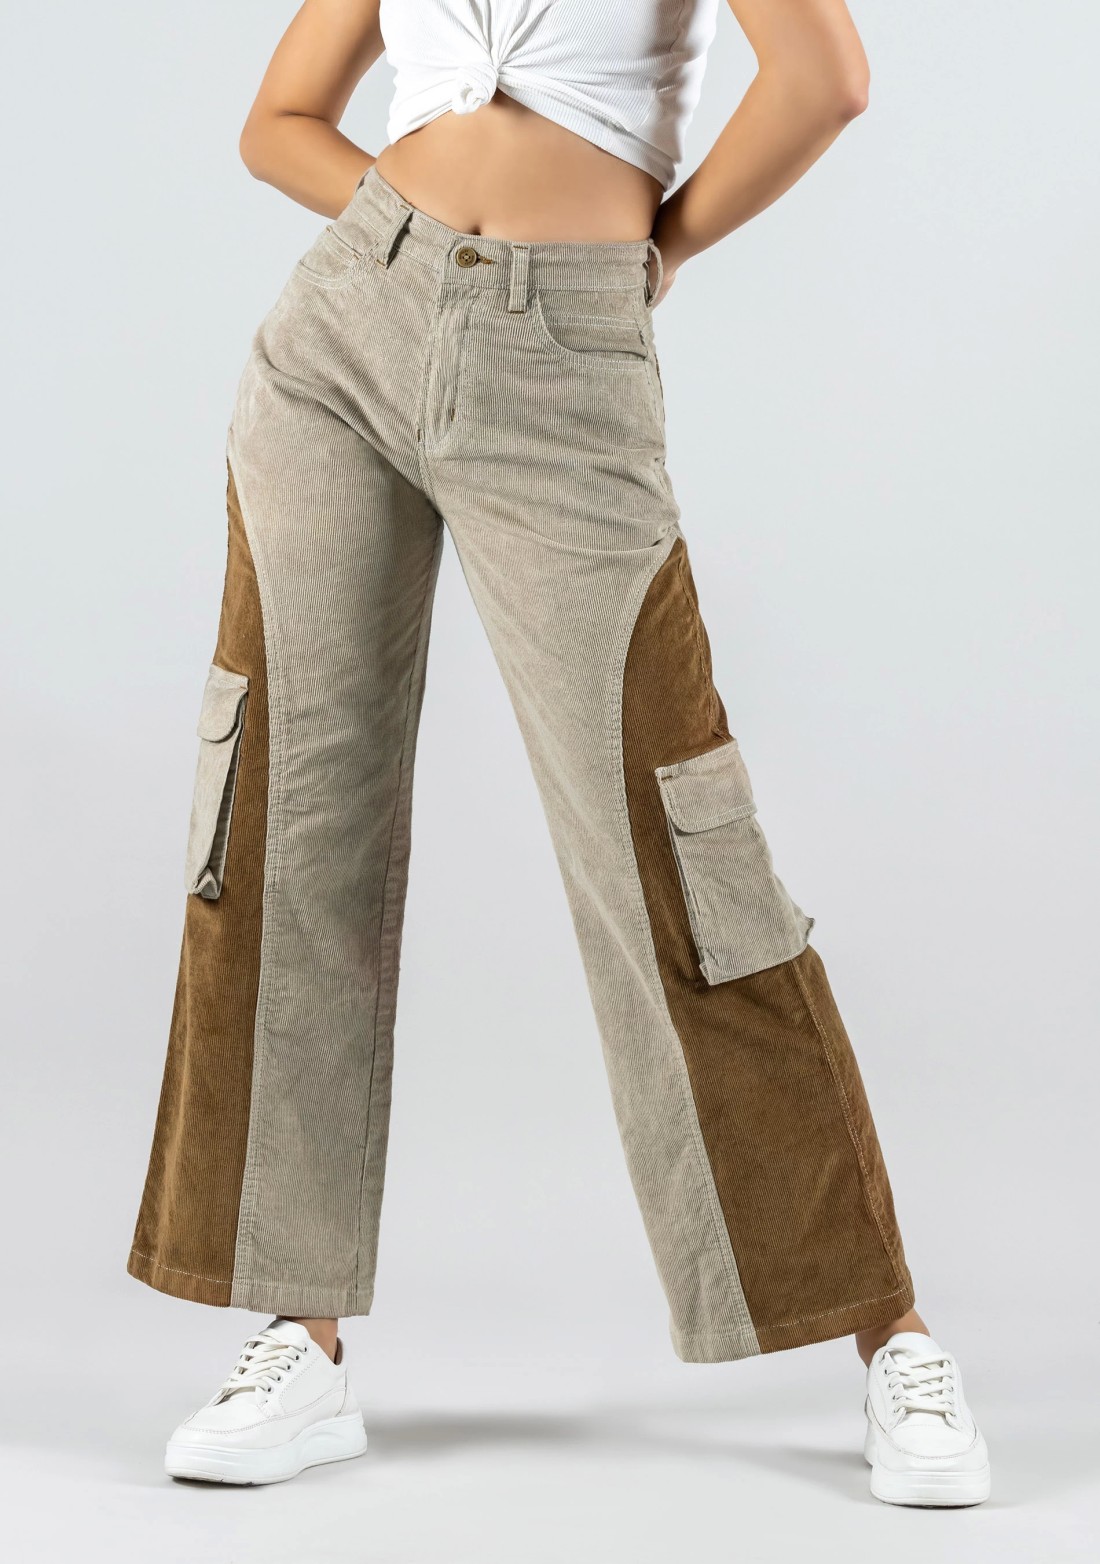 How to Style Wide-Leg Pants- Elevated Casual to Indo-Western